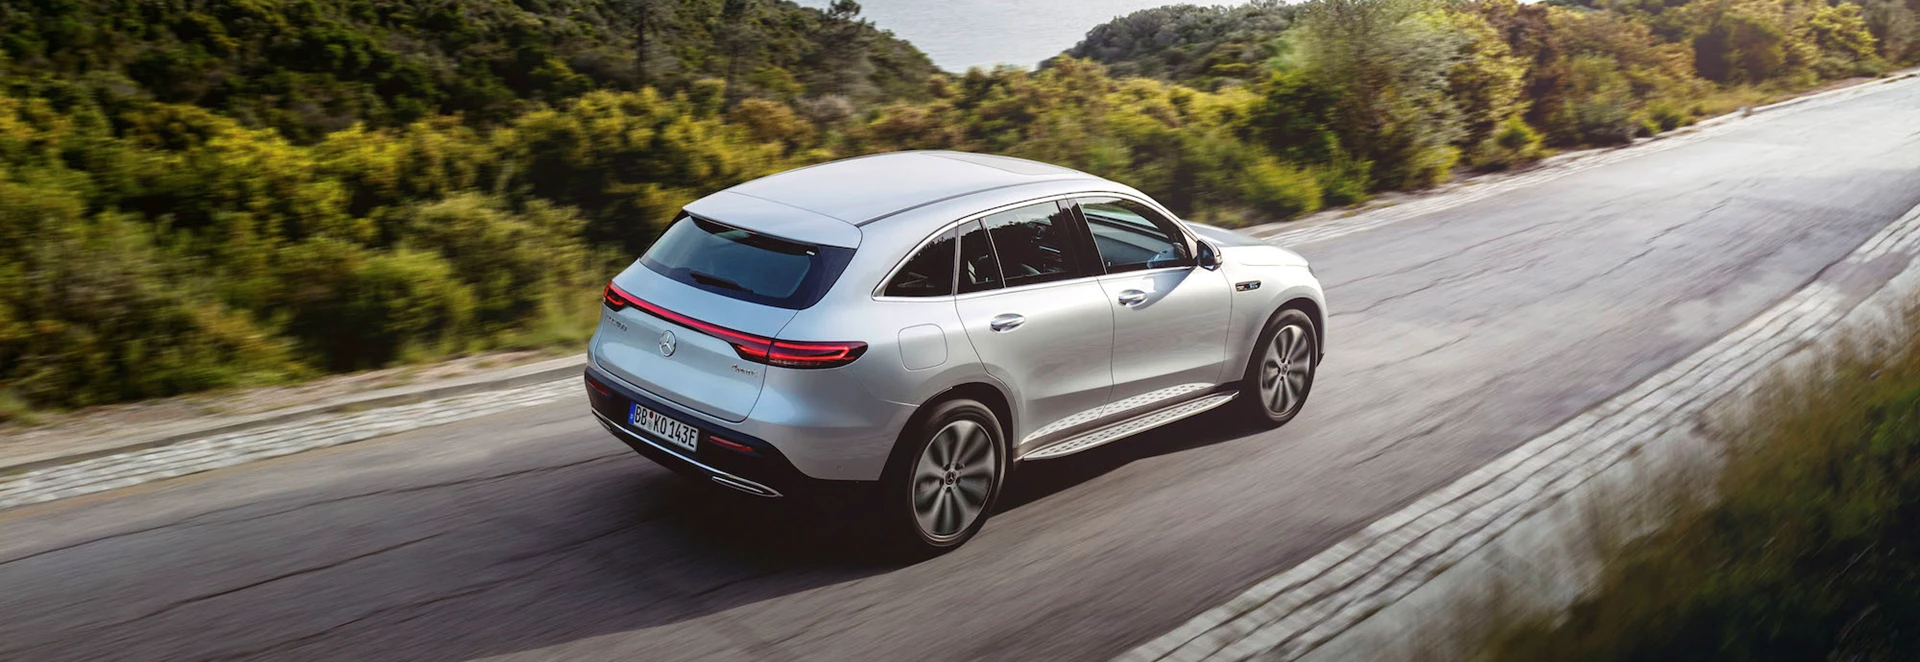 Prices confirmed for new electric Mercedes-Benz EQC SUV